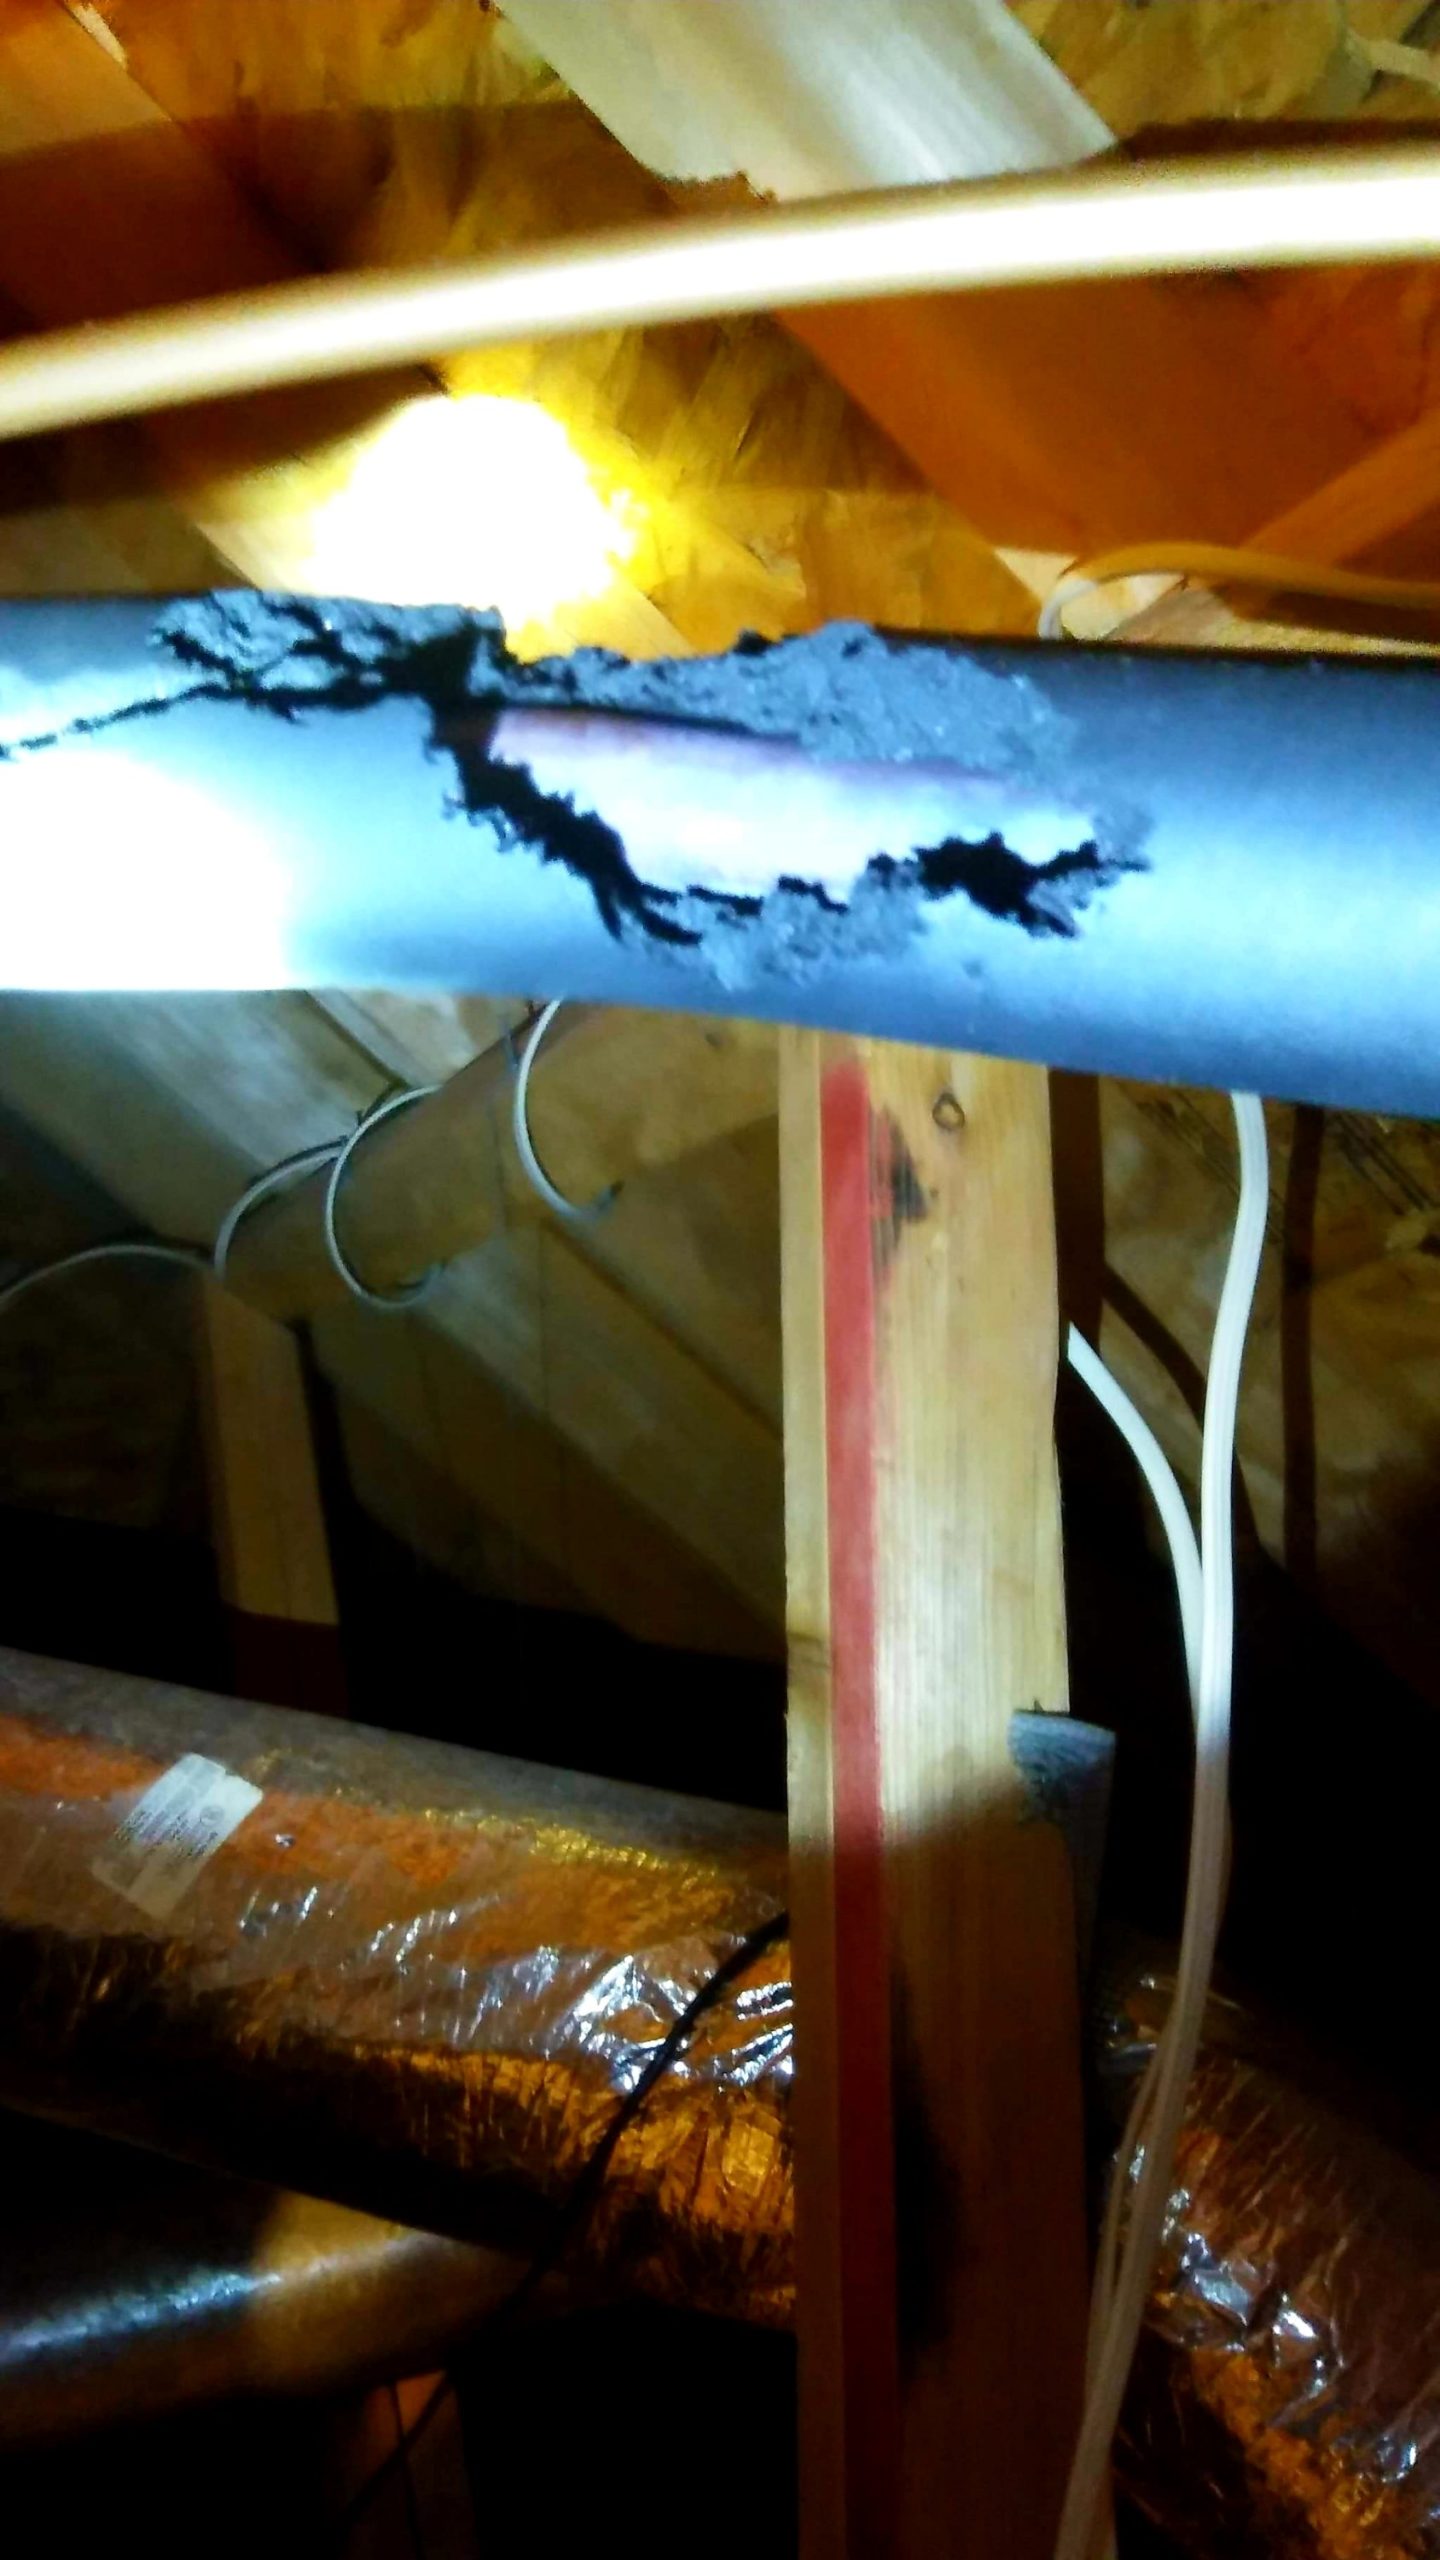 Chewed insulation on piping